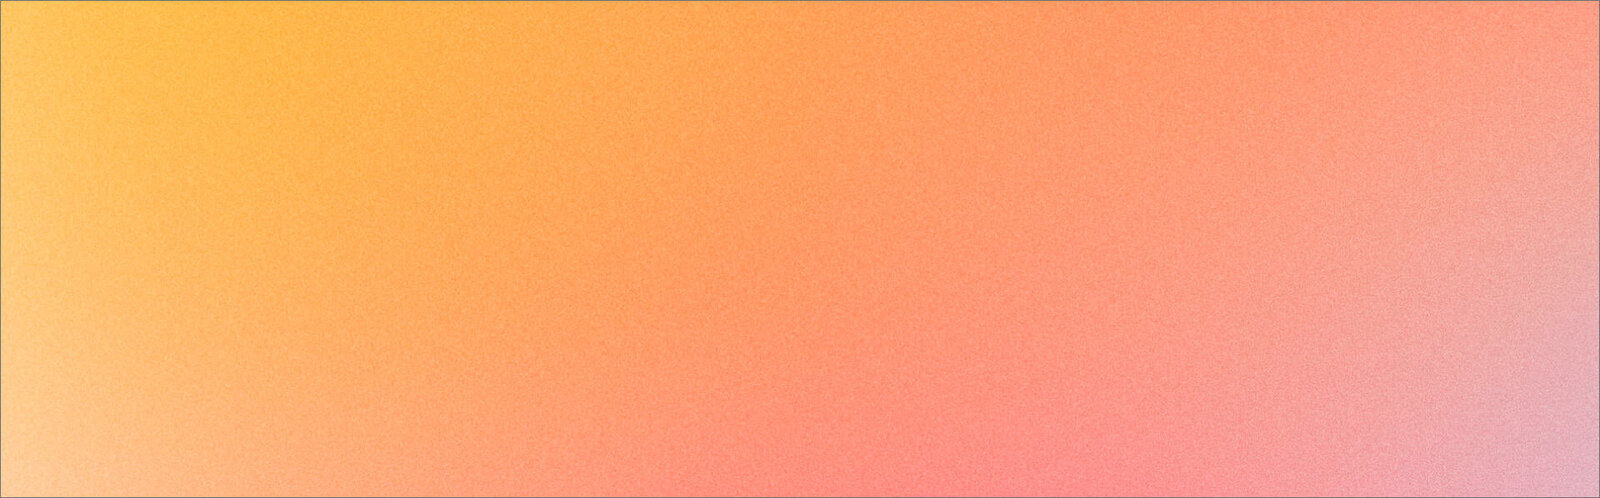 gradient of colors including pink, yellow, blue and orange